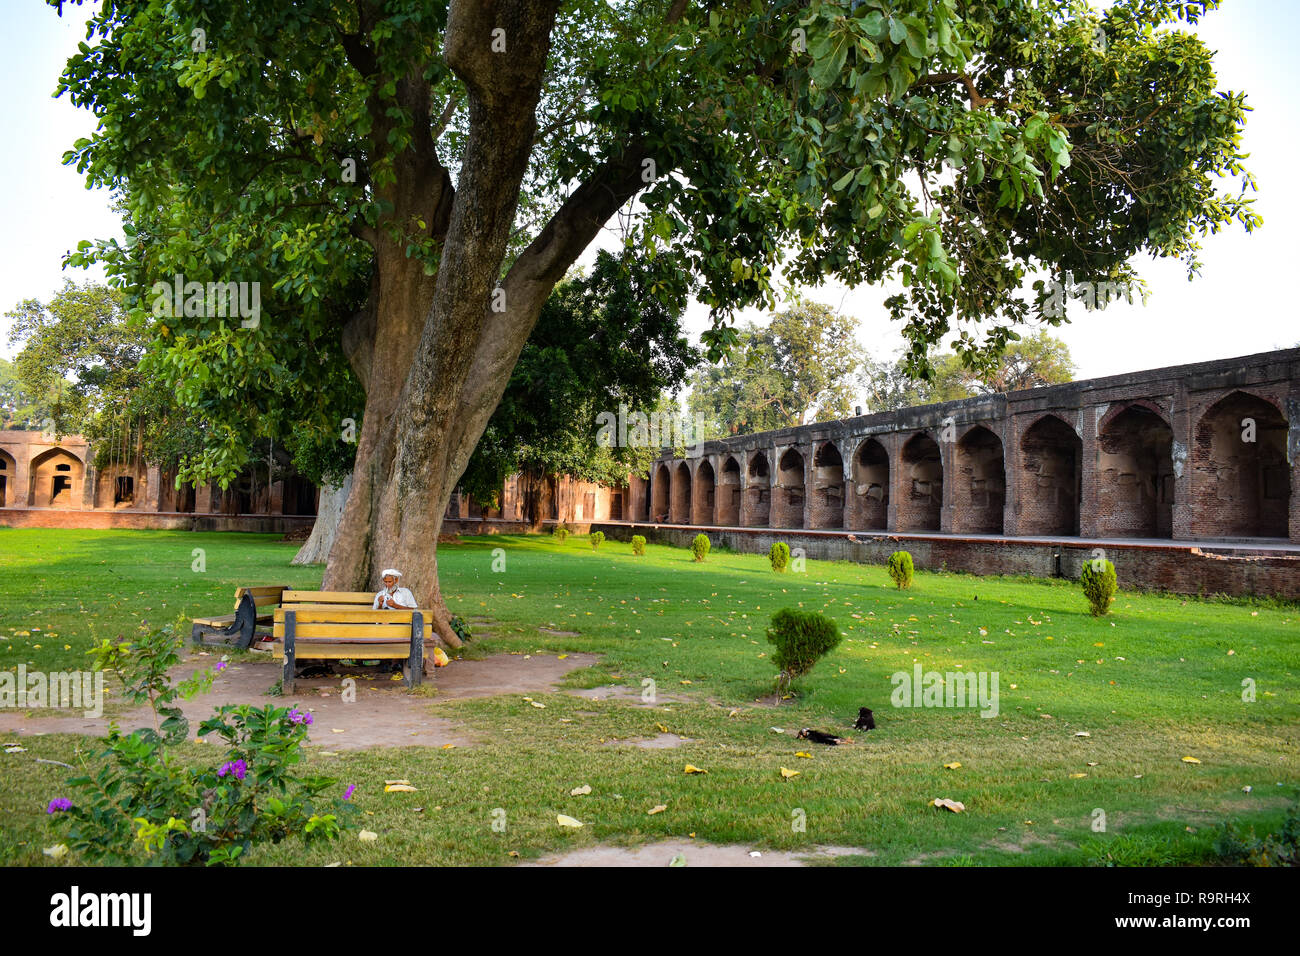 A massive tree overlooking the courtyard of a 16th centure tomb in Lahore, Pakistan. Stock Photo